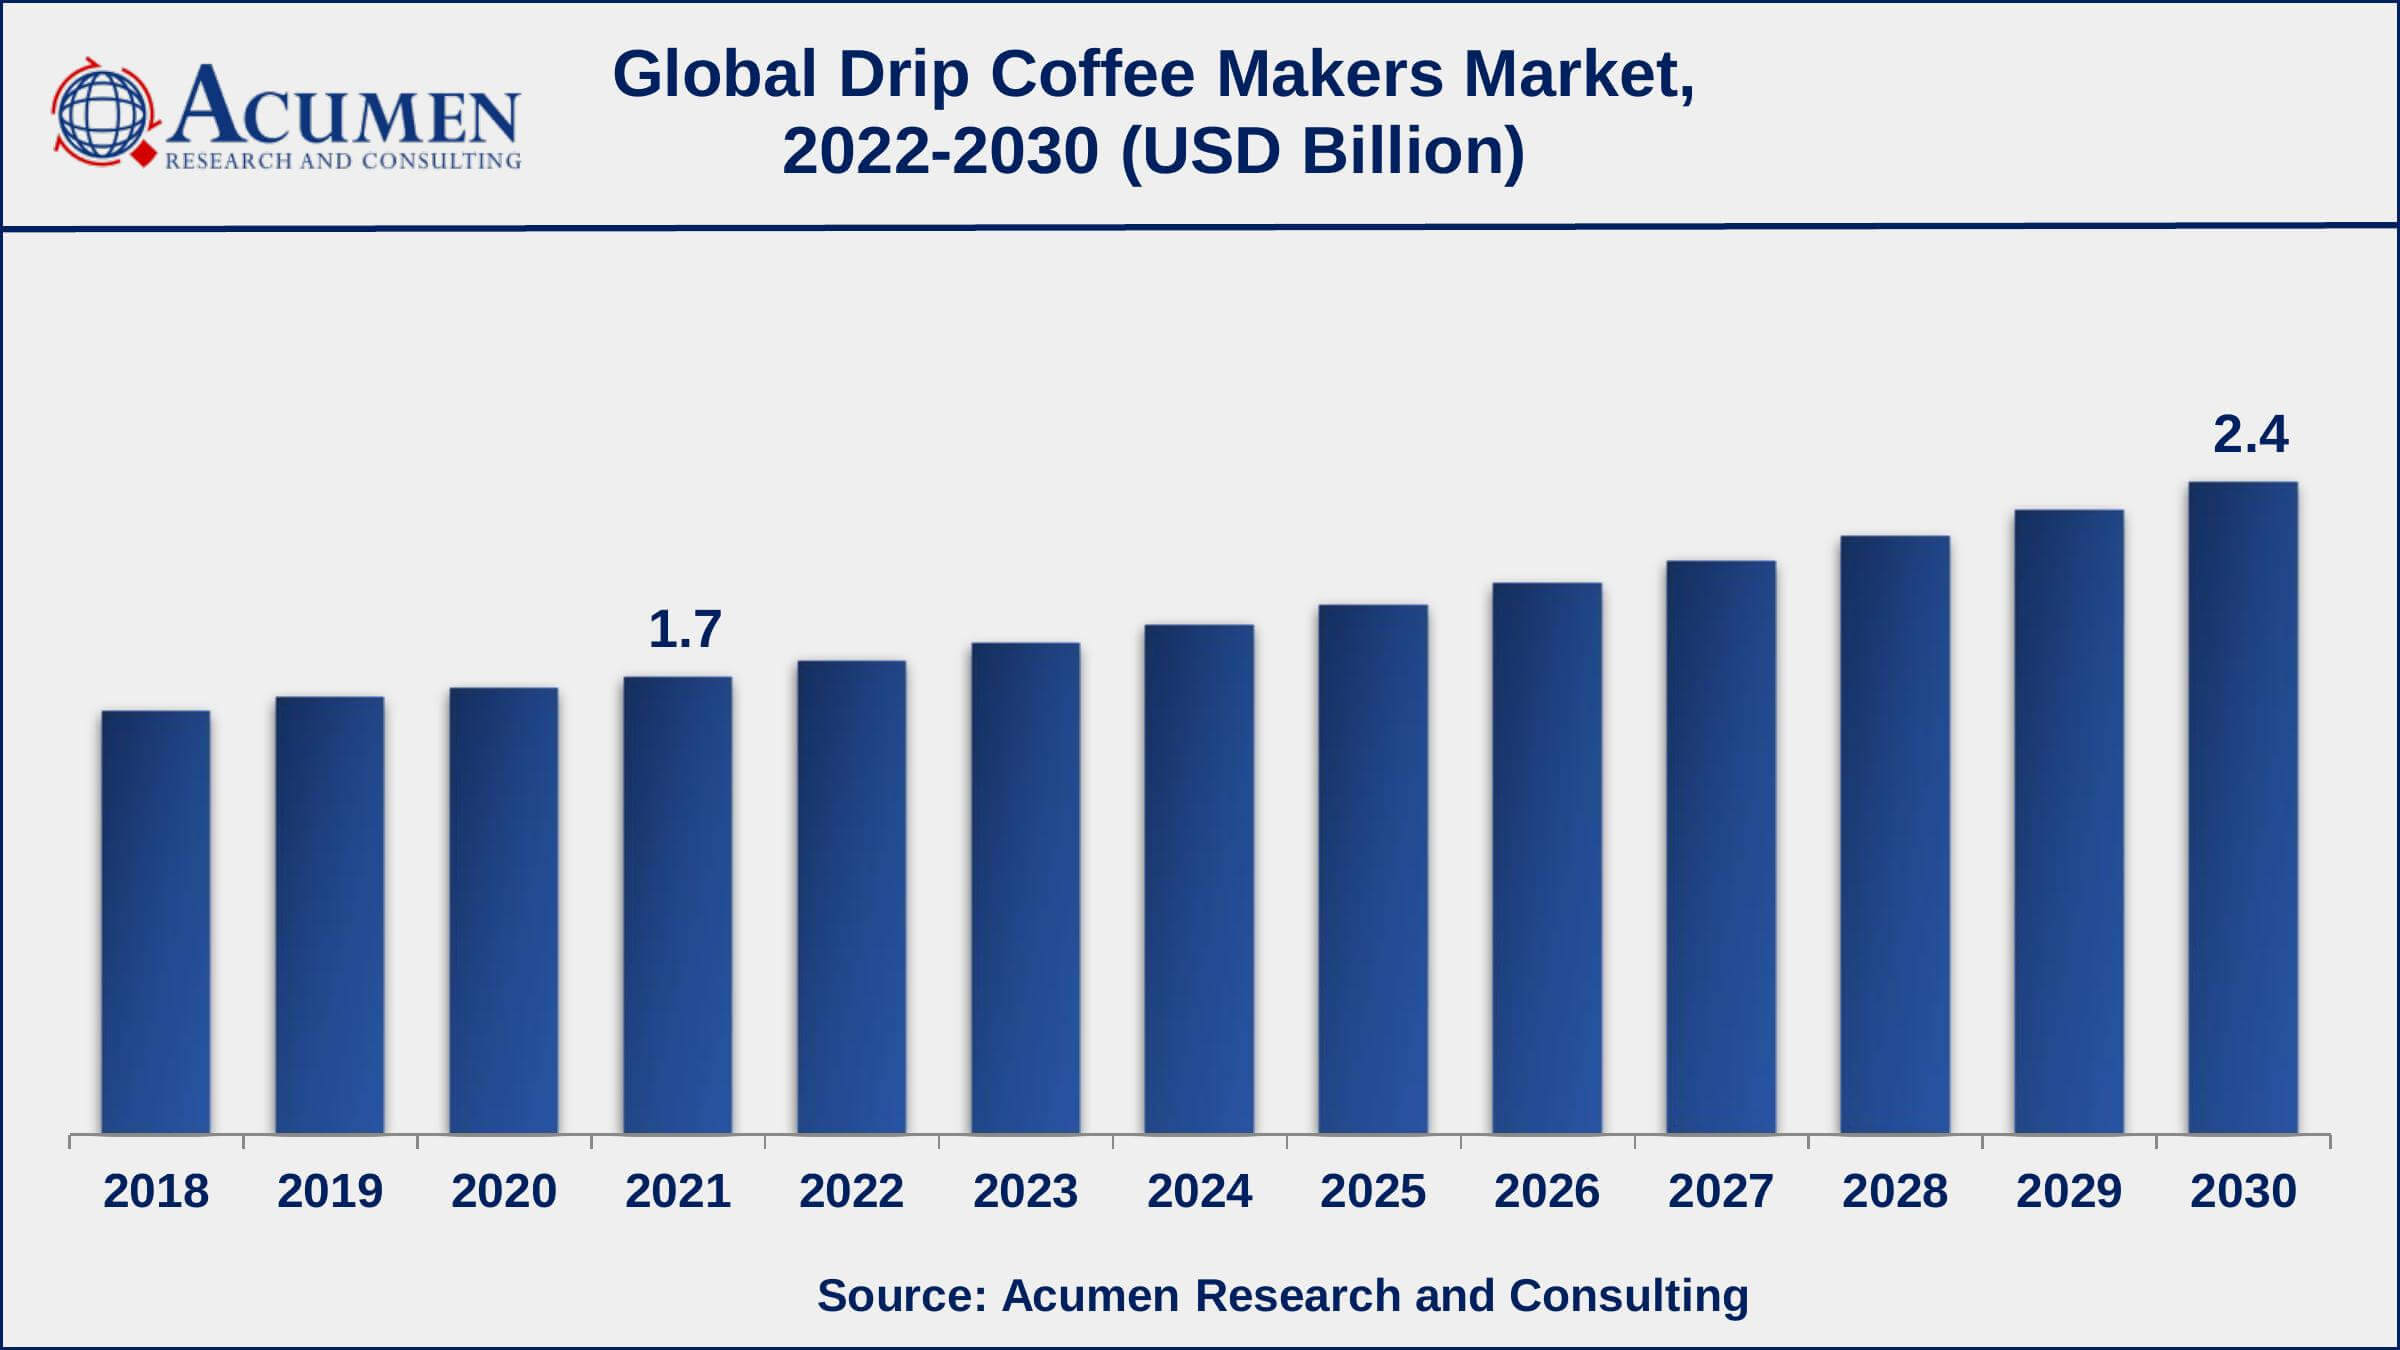 Europe drip coffee makers market share generated over 42% shares in 2021